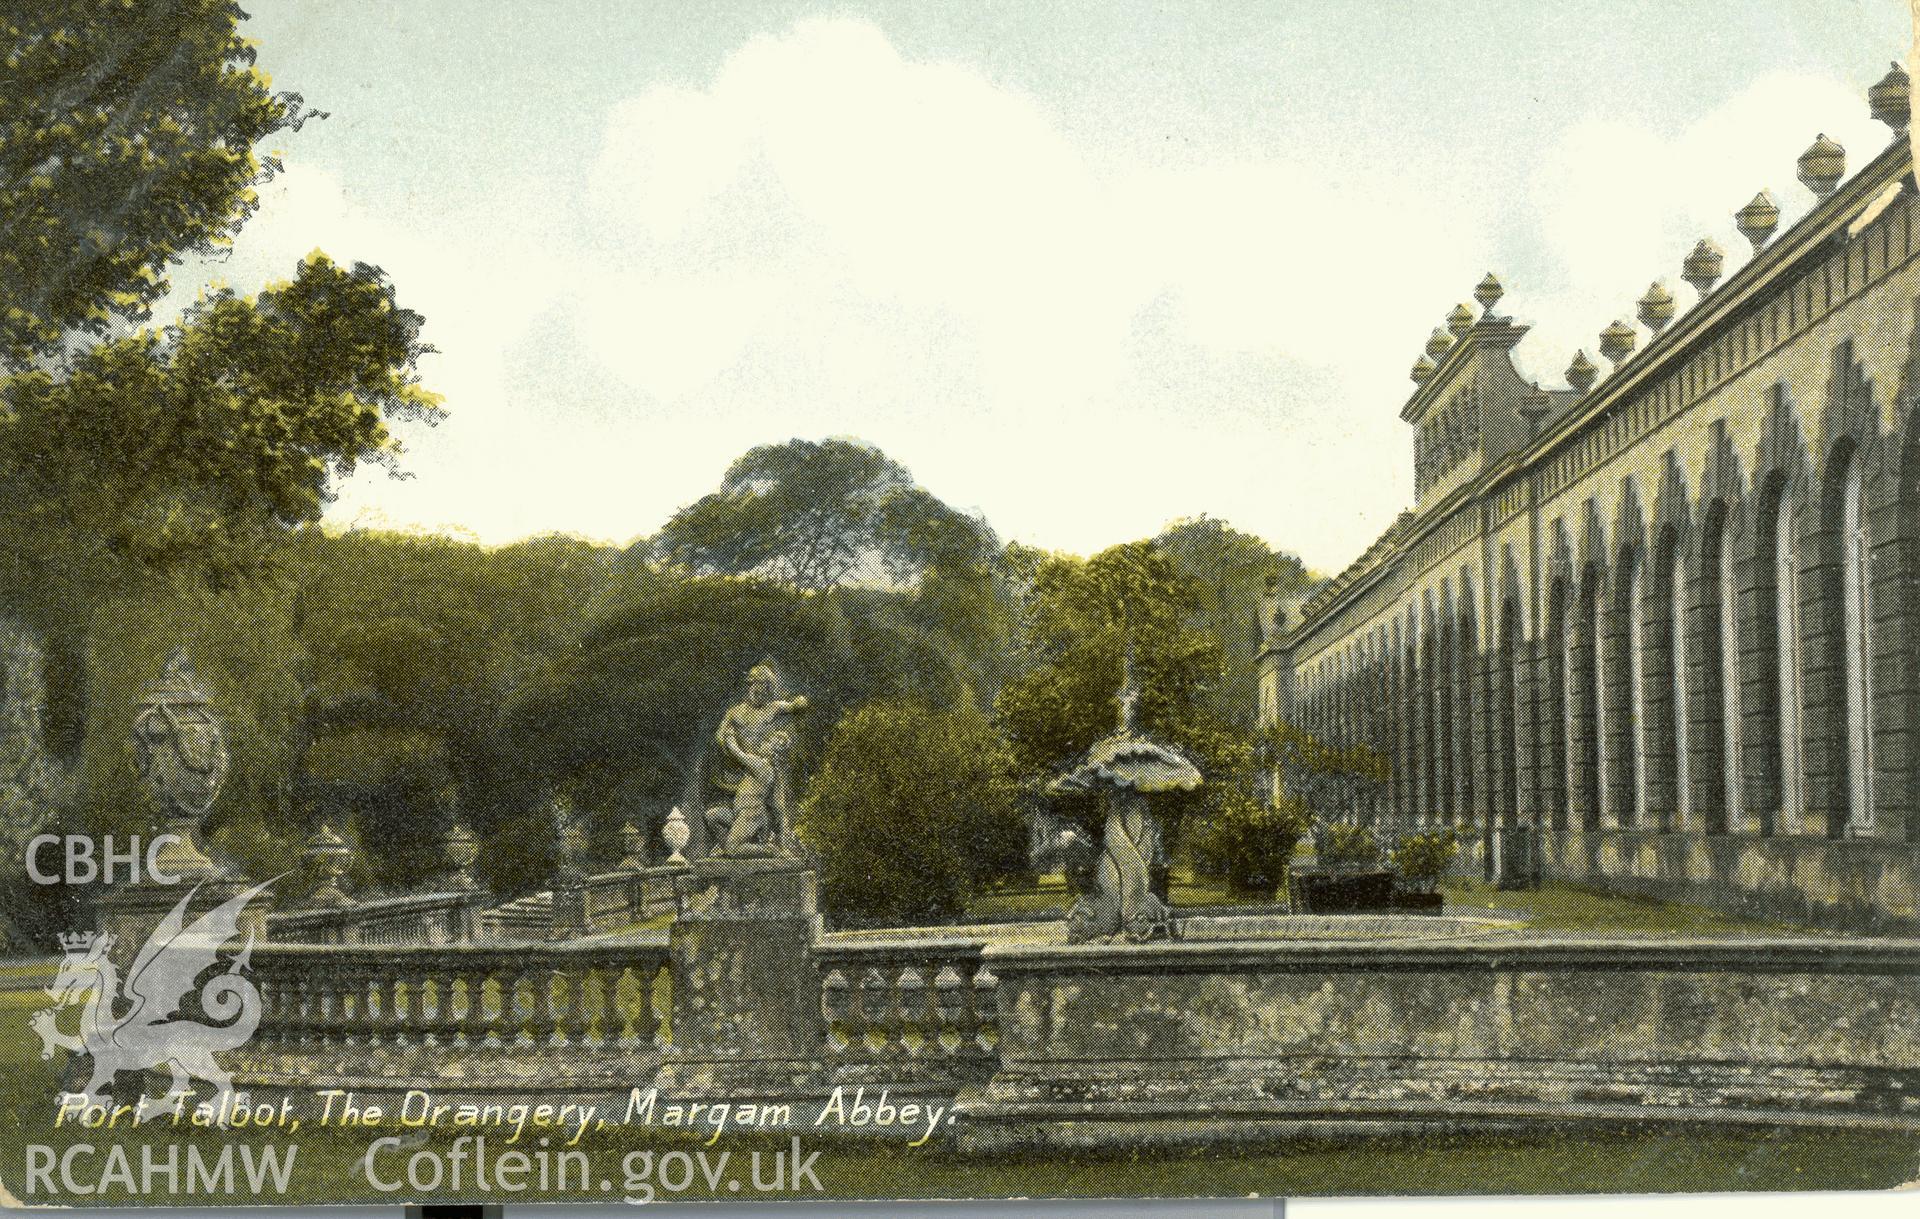 Digitised postcard image of the Orangery, Margam Castle, W.H.S.&S. "Derwent" Series. Produced by Parks and Gardens Data Services, from an original item in the Peter Davis Collection at Parks and Gardens UK. We hold only web-resolution images of this collection, suitable for viewing on screen and for research purposes only. We do not hold the original images, or publication quality scans.